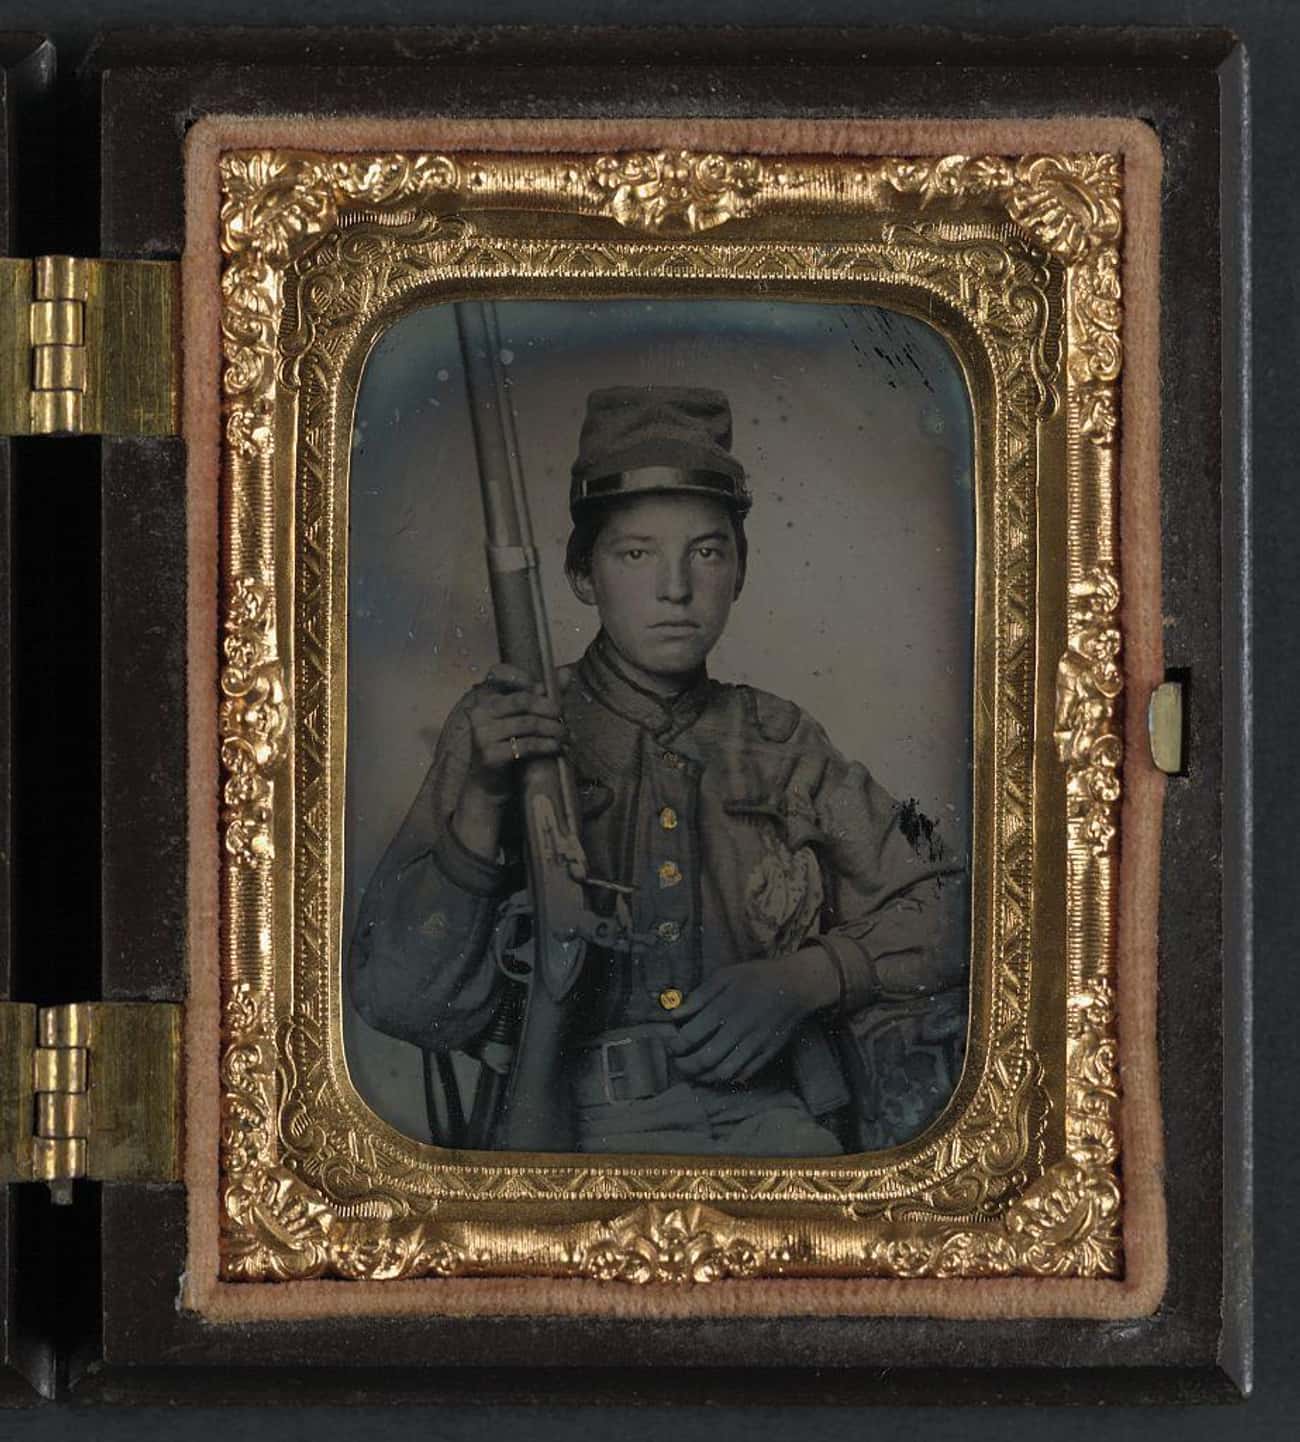 Sergeant William T. Biedler, 16 Years Old, Of Company C, Mosby's Virginia Cavalry Regiment